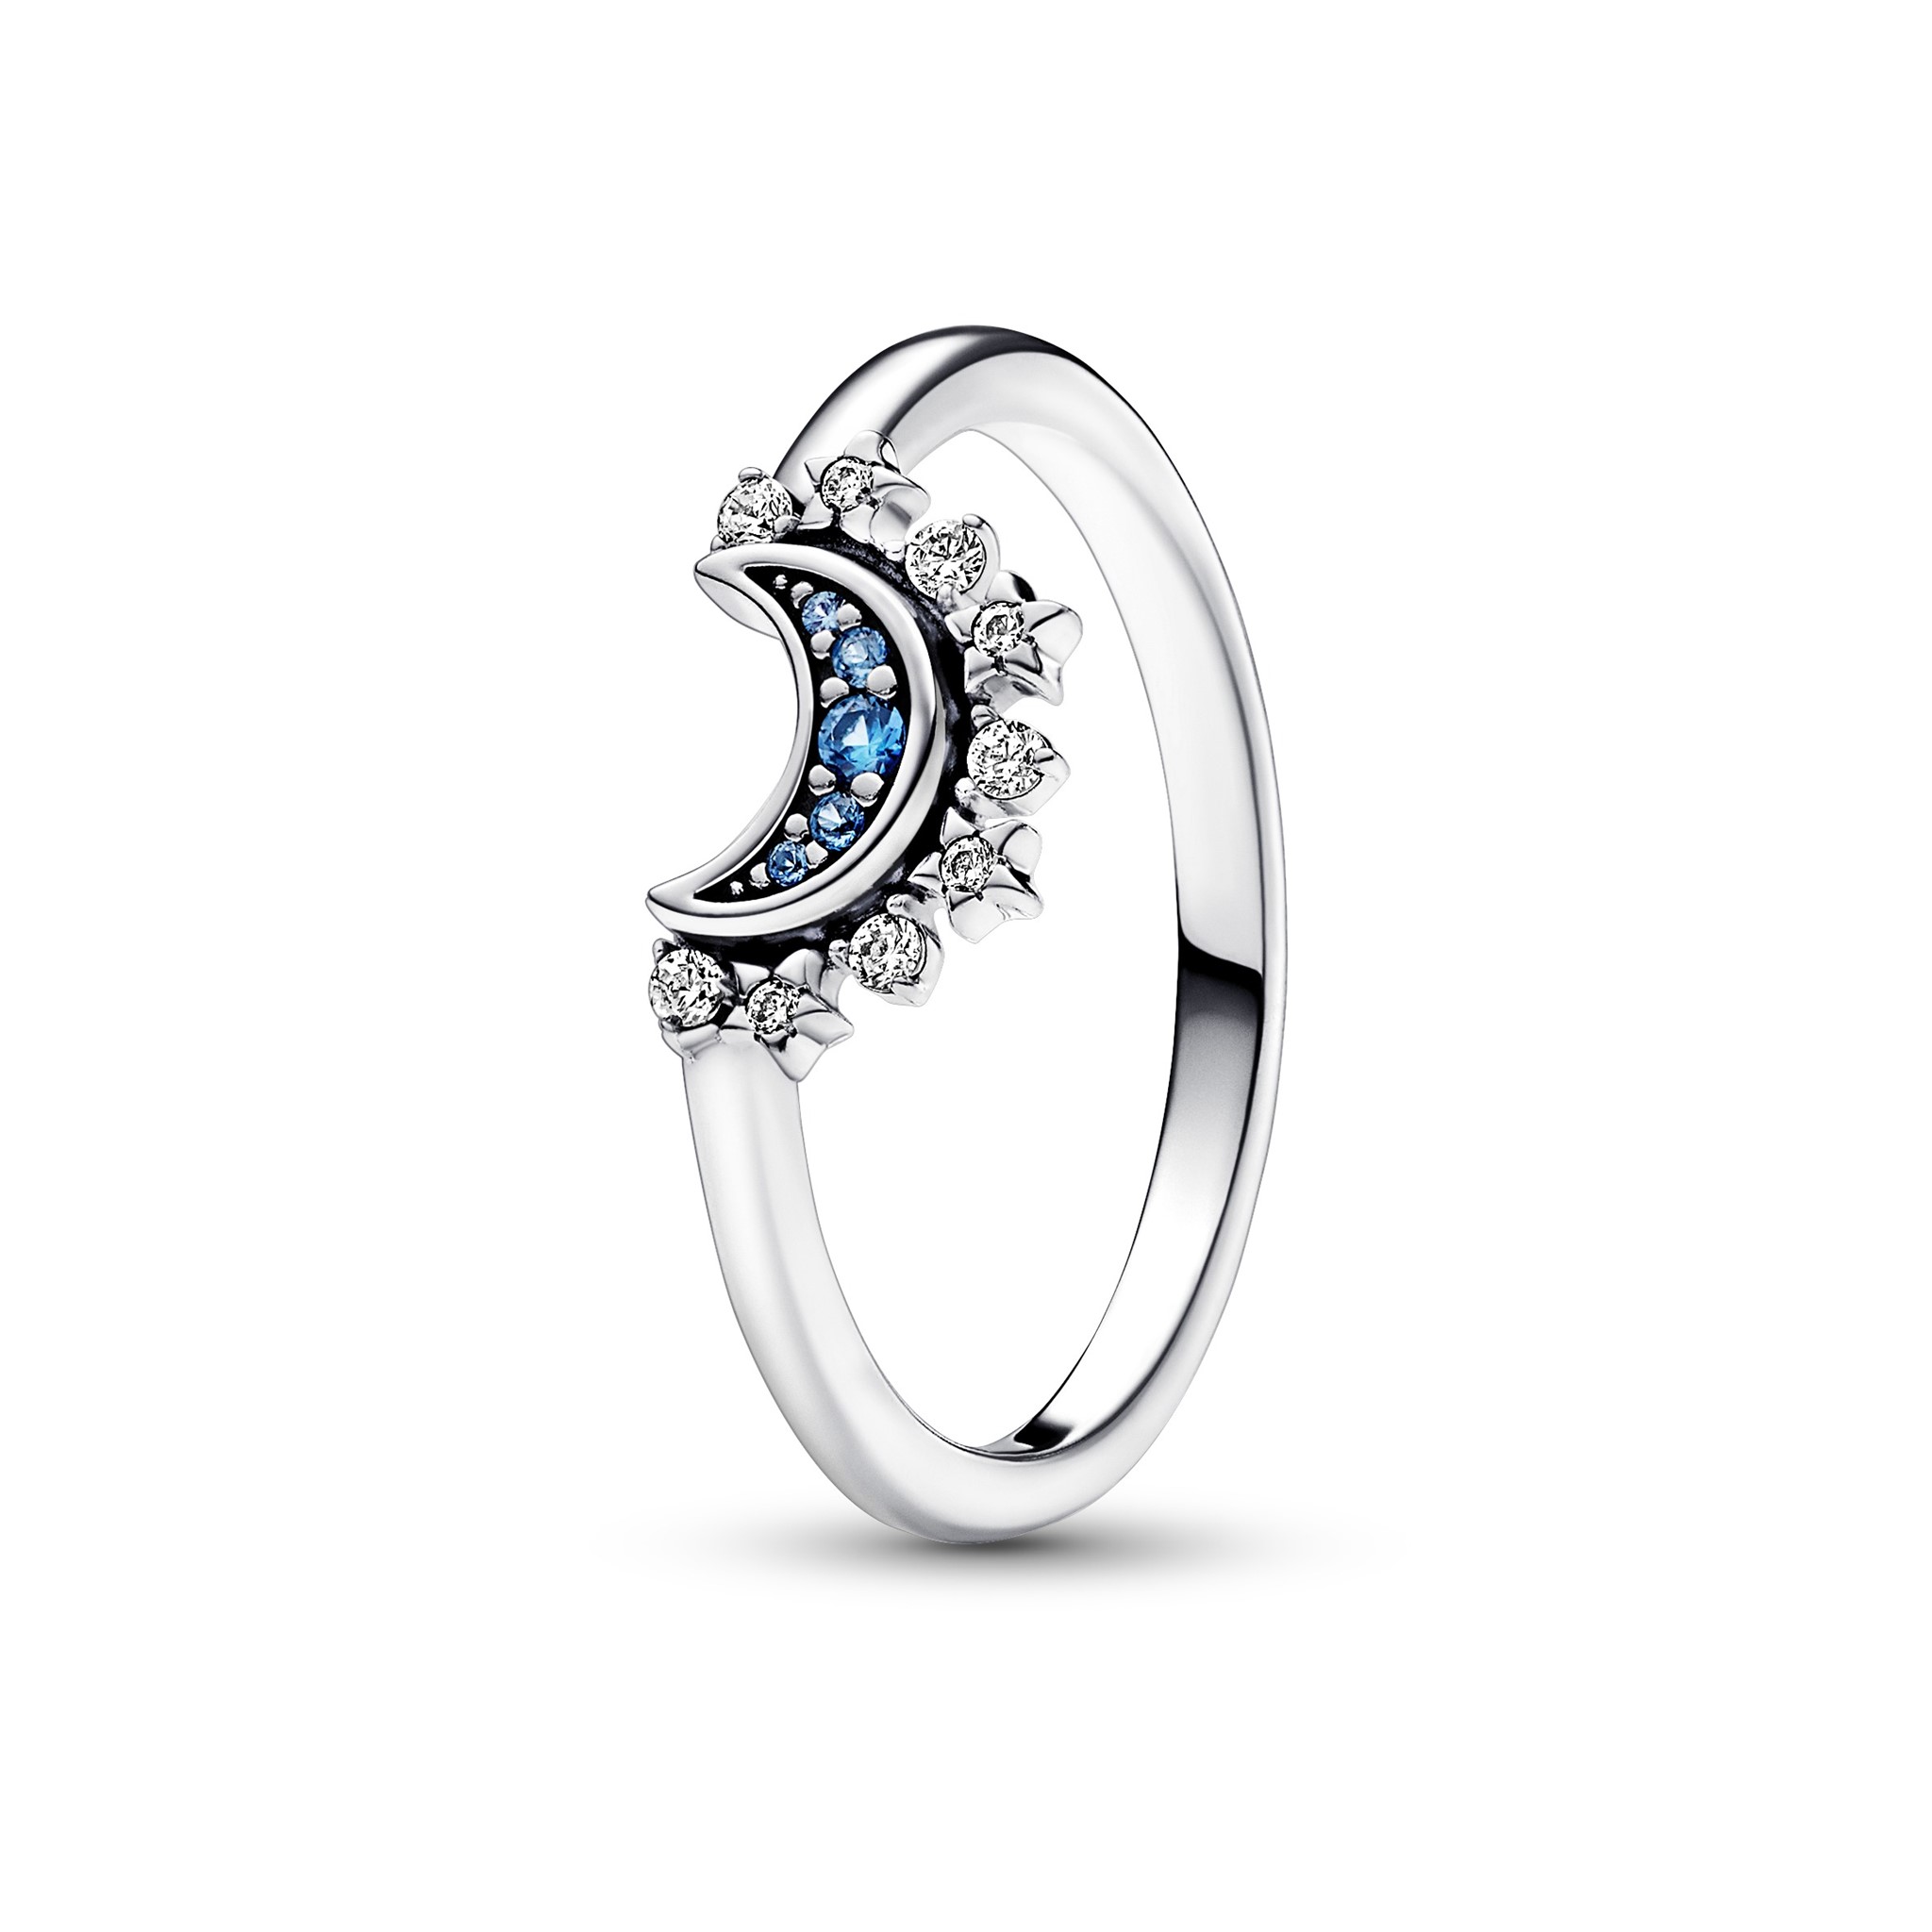 Celestial moon sterling silver ring with night blue crystal